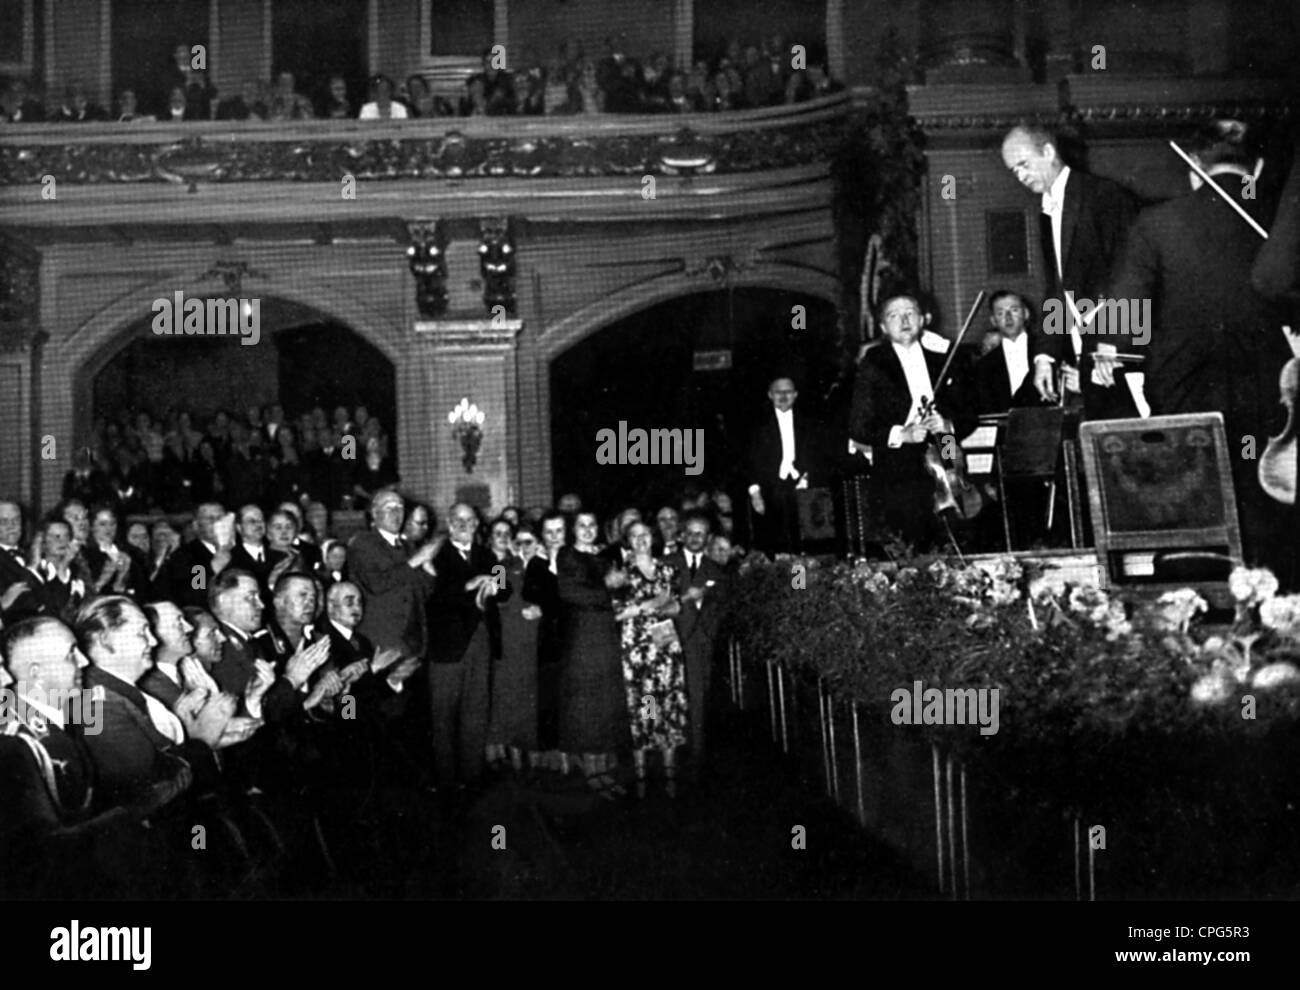 Furtwaengler, Wilhelm, 25.1.1886 - 30.11.1954, German musician (conductor, composer), half length, during of a concert of the Berlin Philharmonic Orchestra, among the audience: Goering, Hitler, Goebbels, 1935, Stock Photo